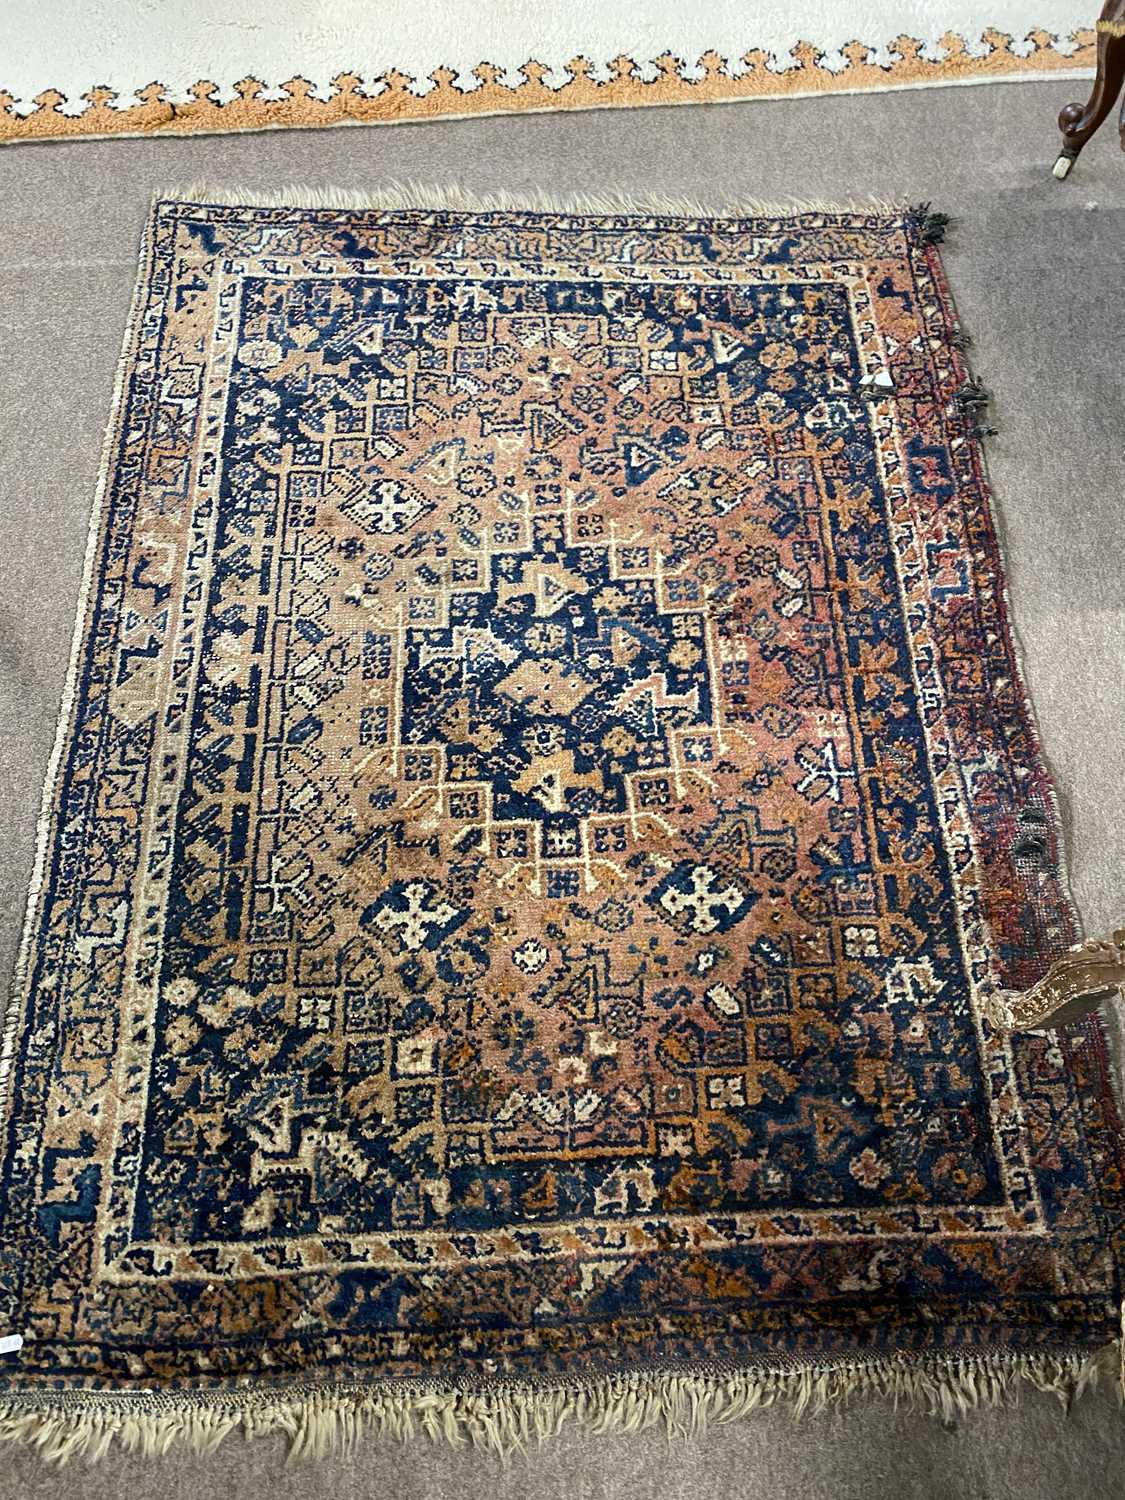 Small antique Middle Eastern wool floor rug decorated with a large central lozenge on a